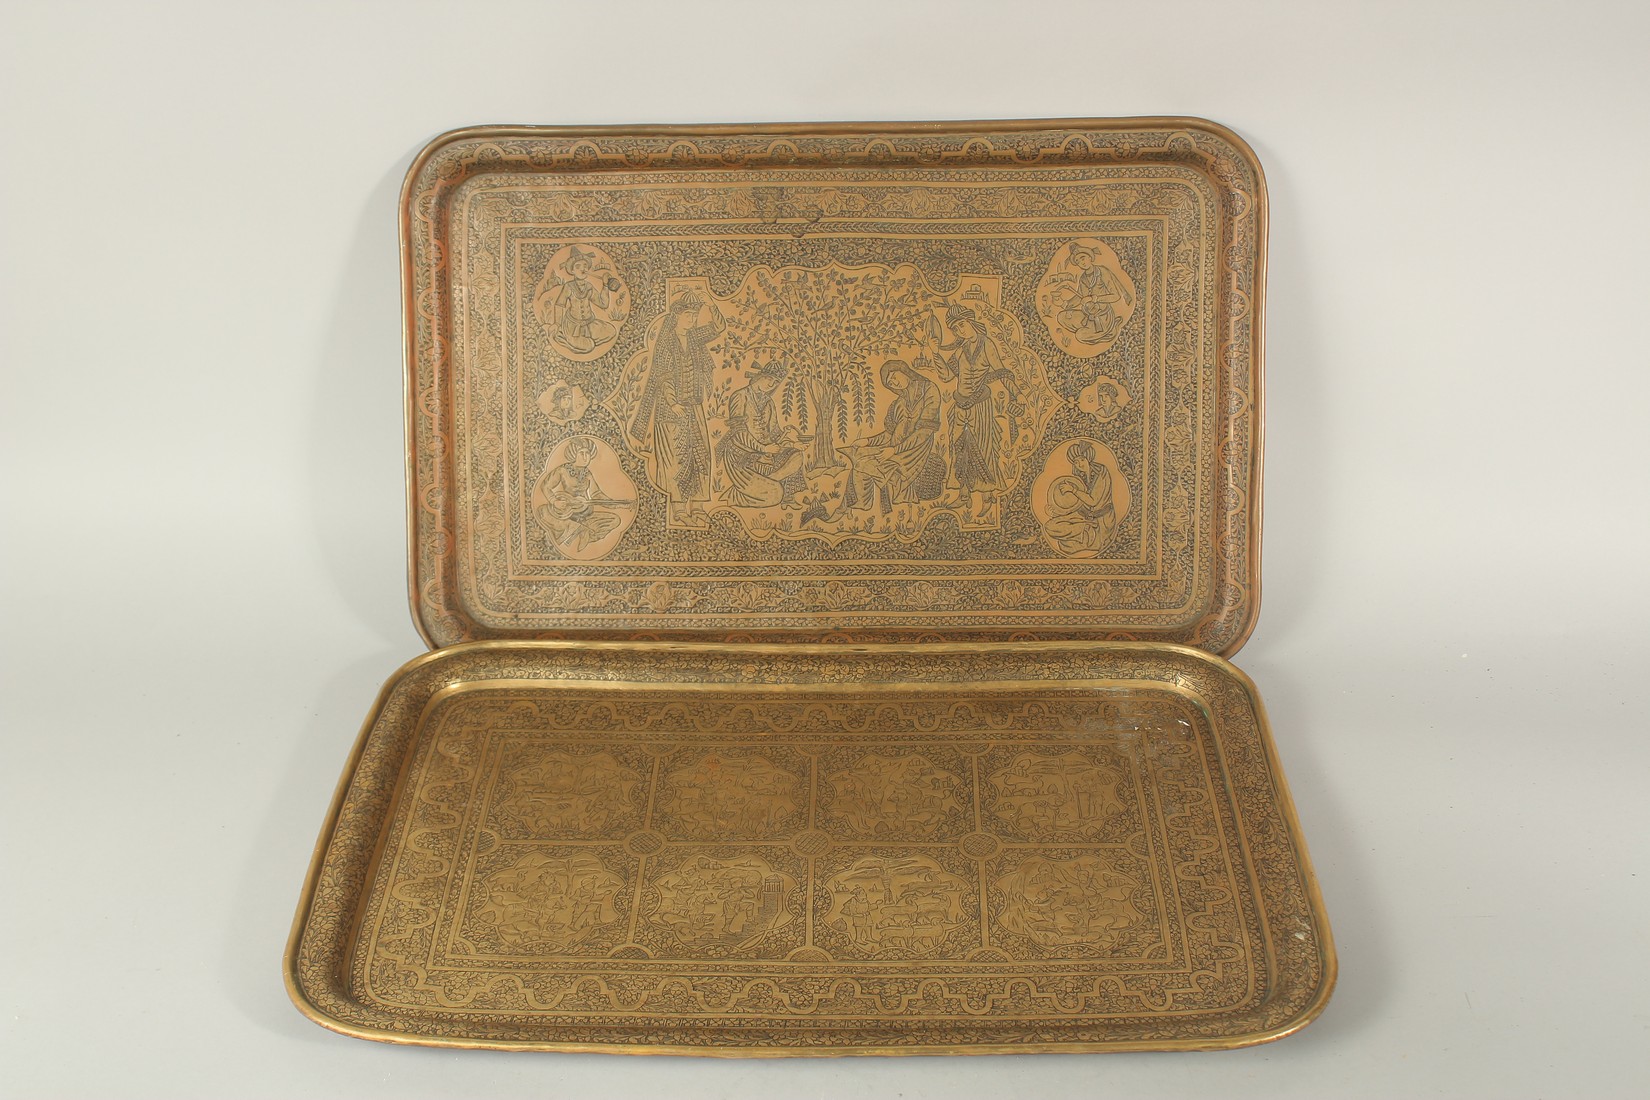 TWO FINE PERSIAN QAJAR BRASS ENGRAVED TRAYS, with pictorial panels, 58cm x 37.5cm and 58.5cm x 38.